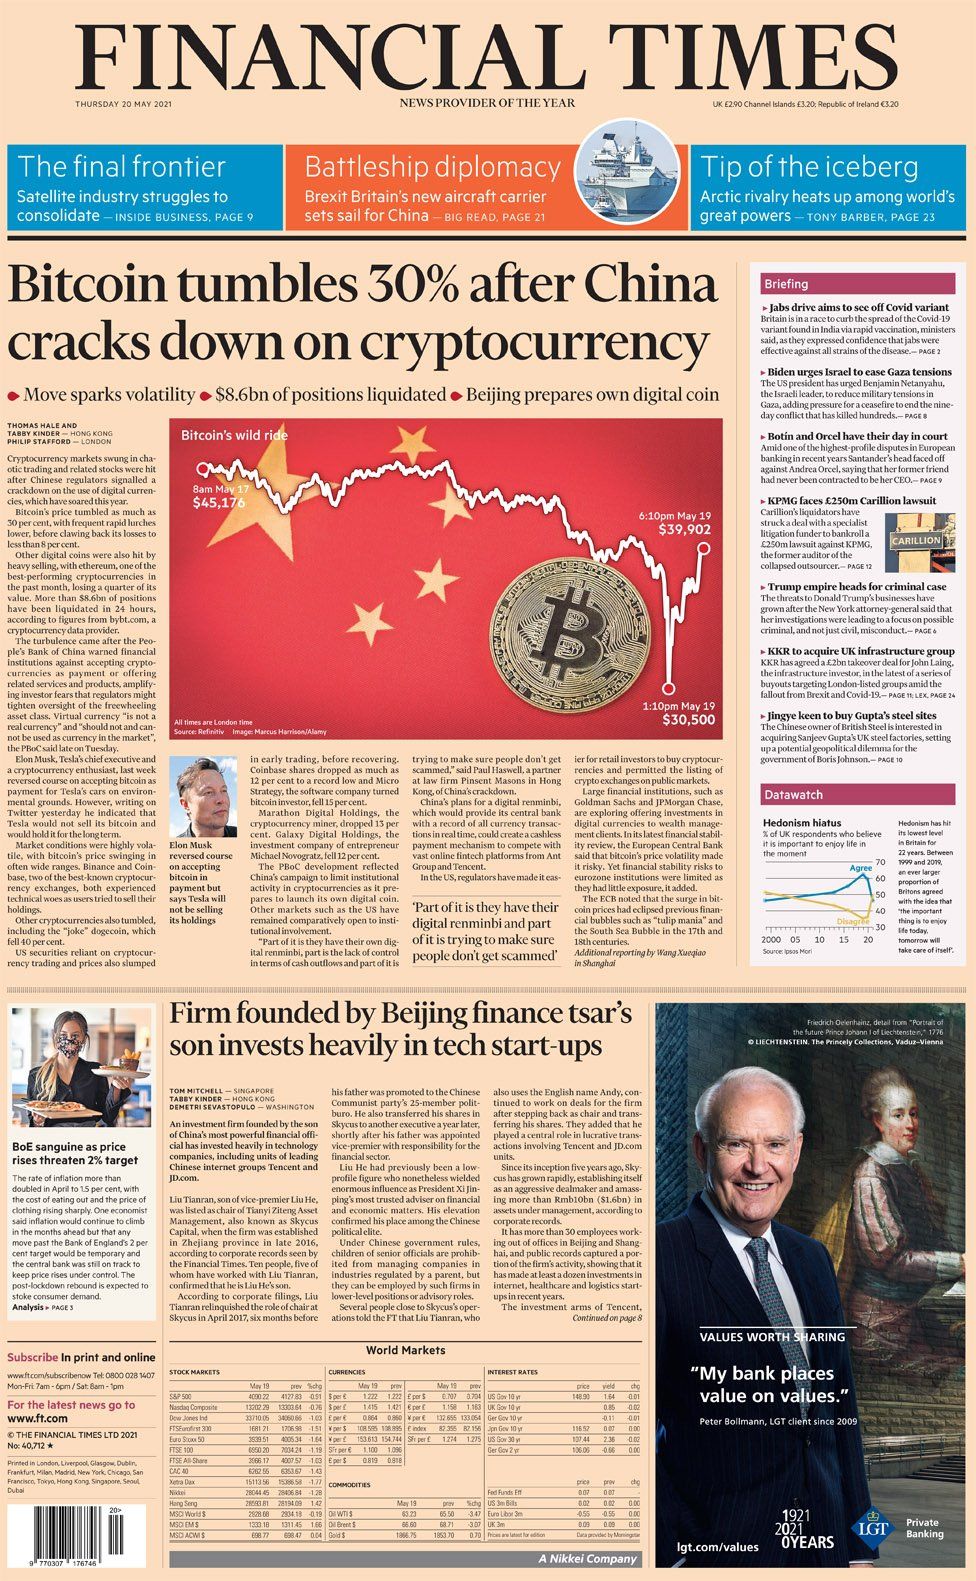 The Financial Times 20 May